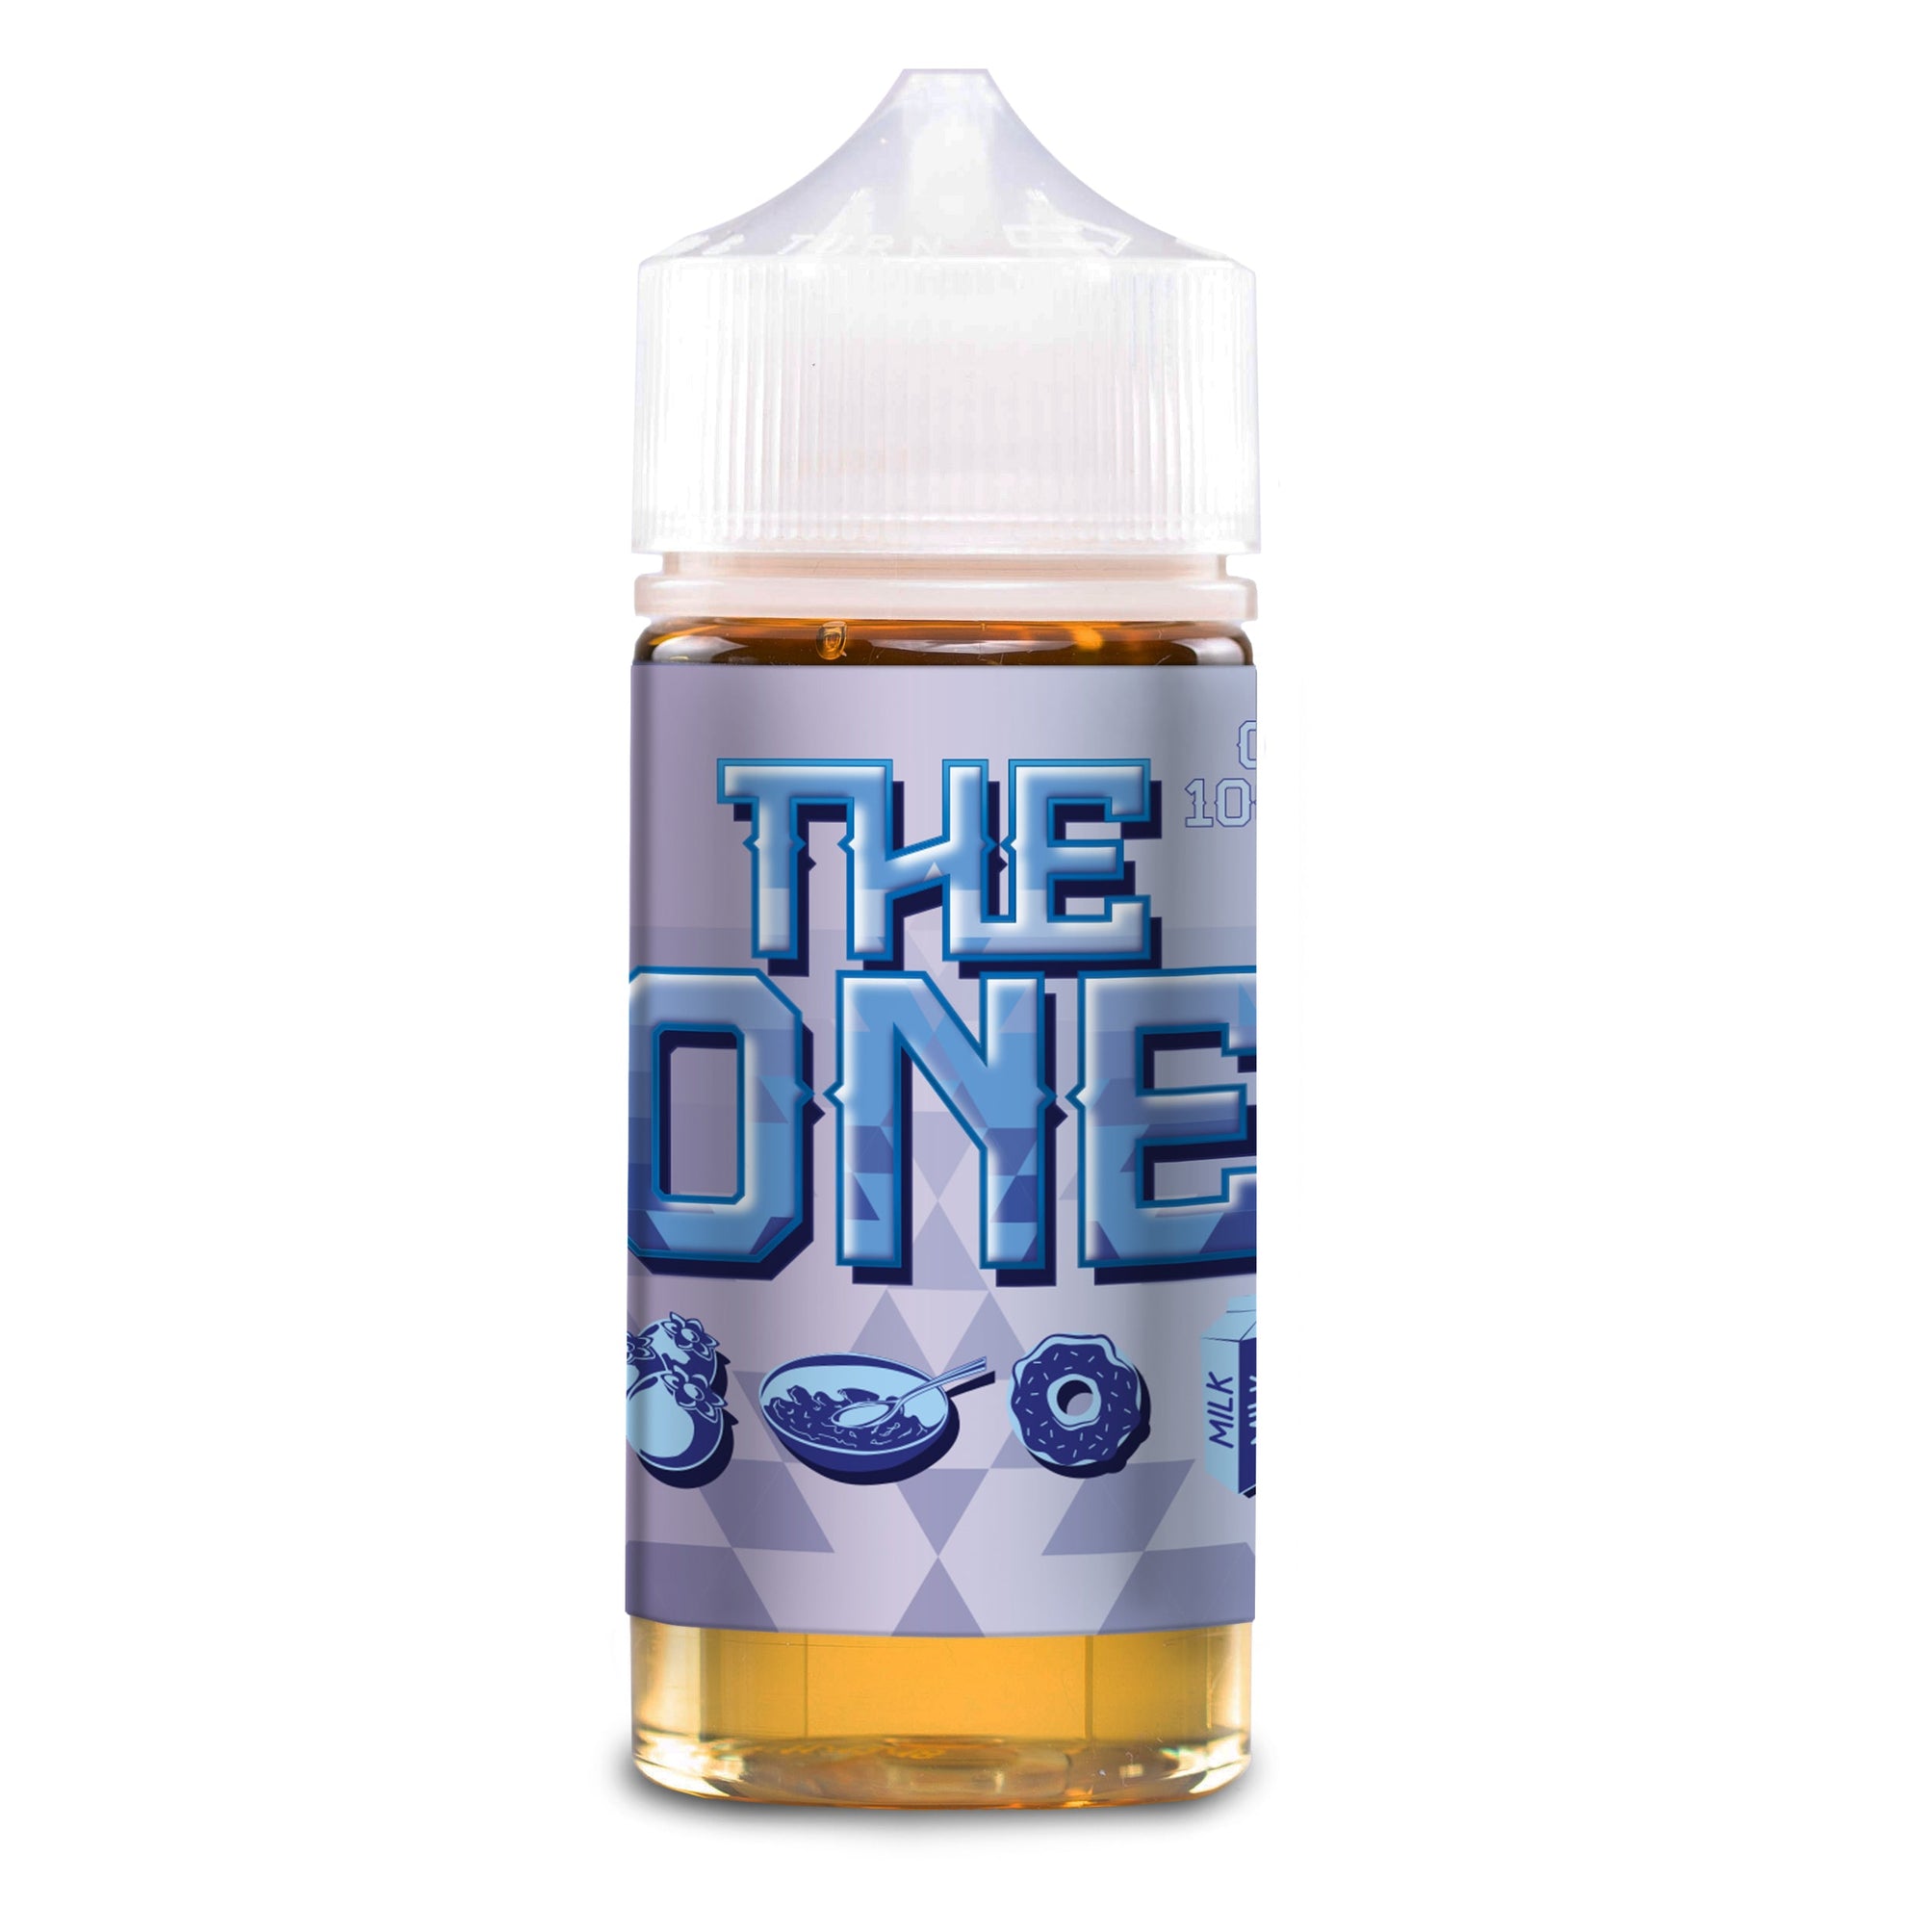 Buy Blueberry by The One Eliquid - Wick And Wire Co Melbourne Vape Shop, Victoria Australia